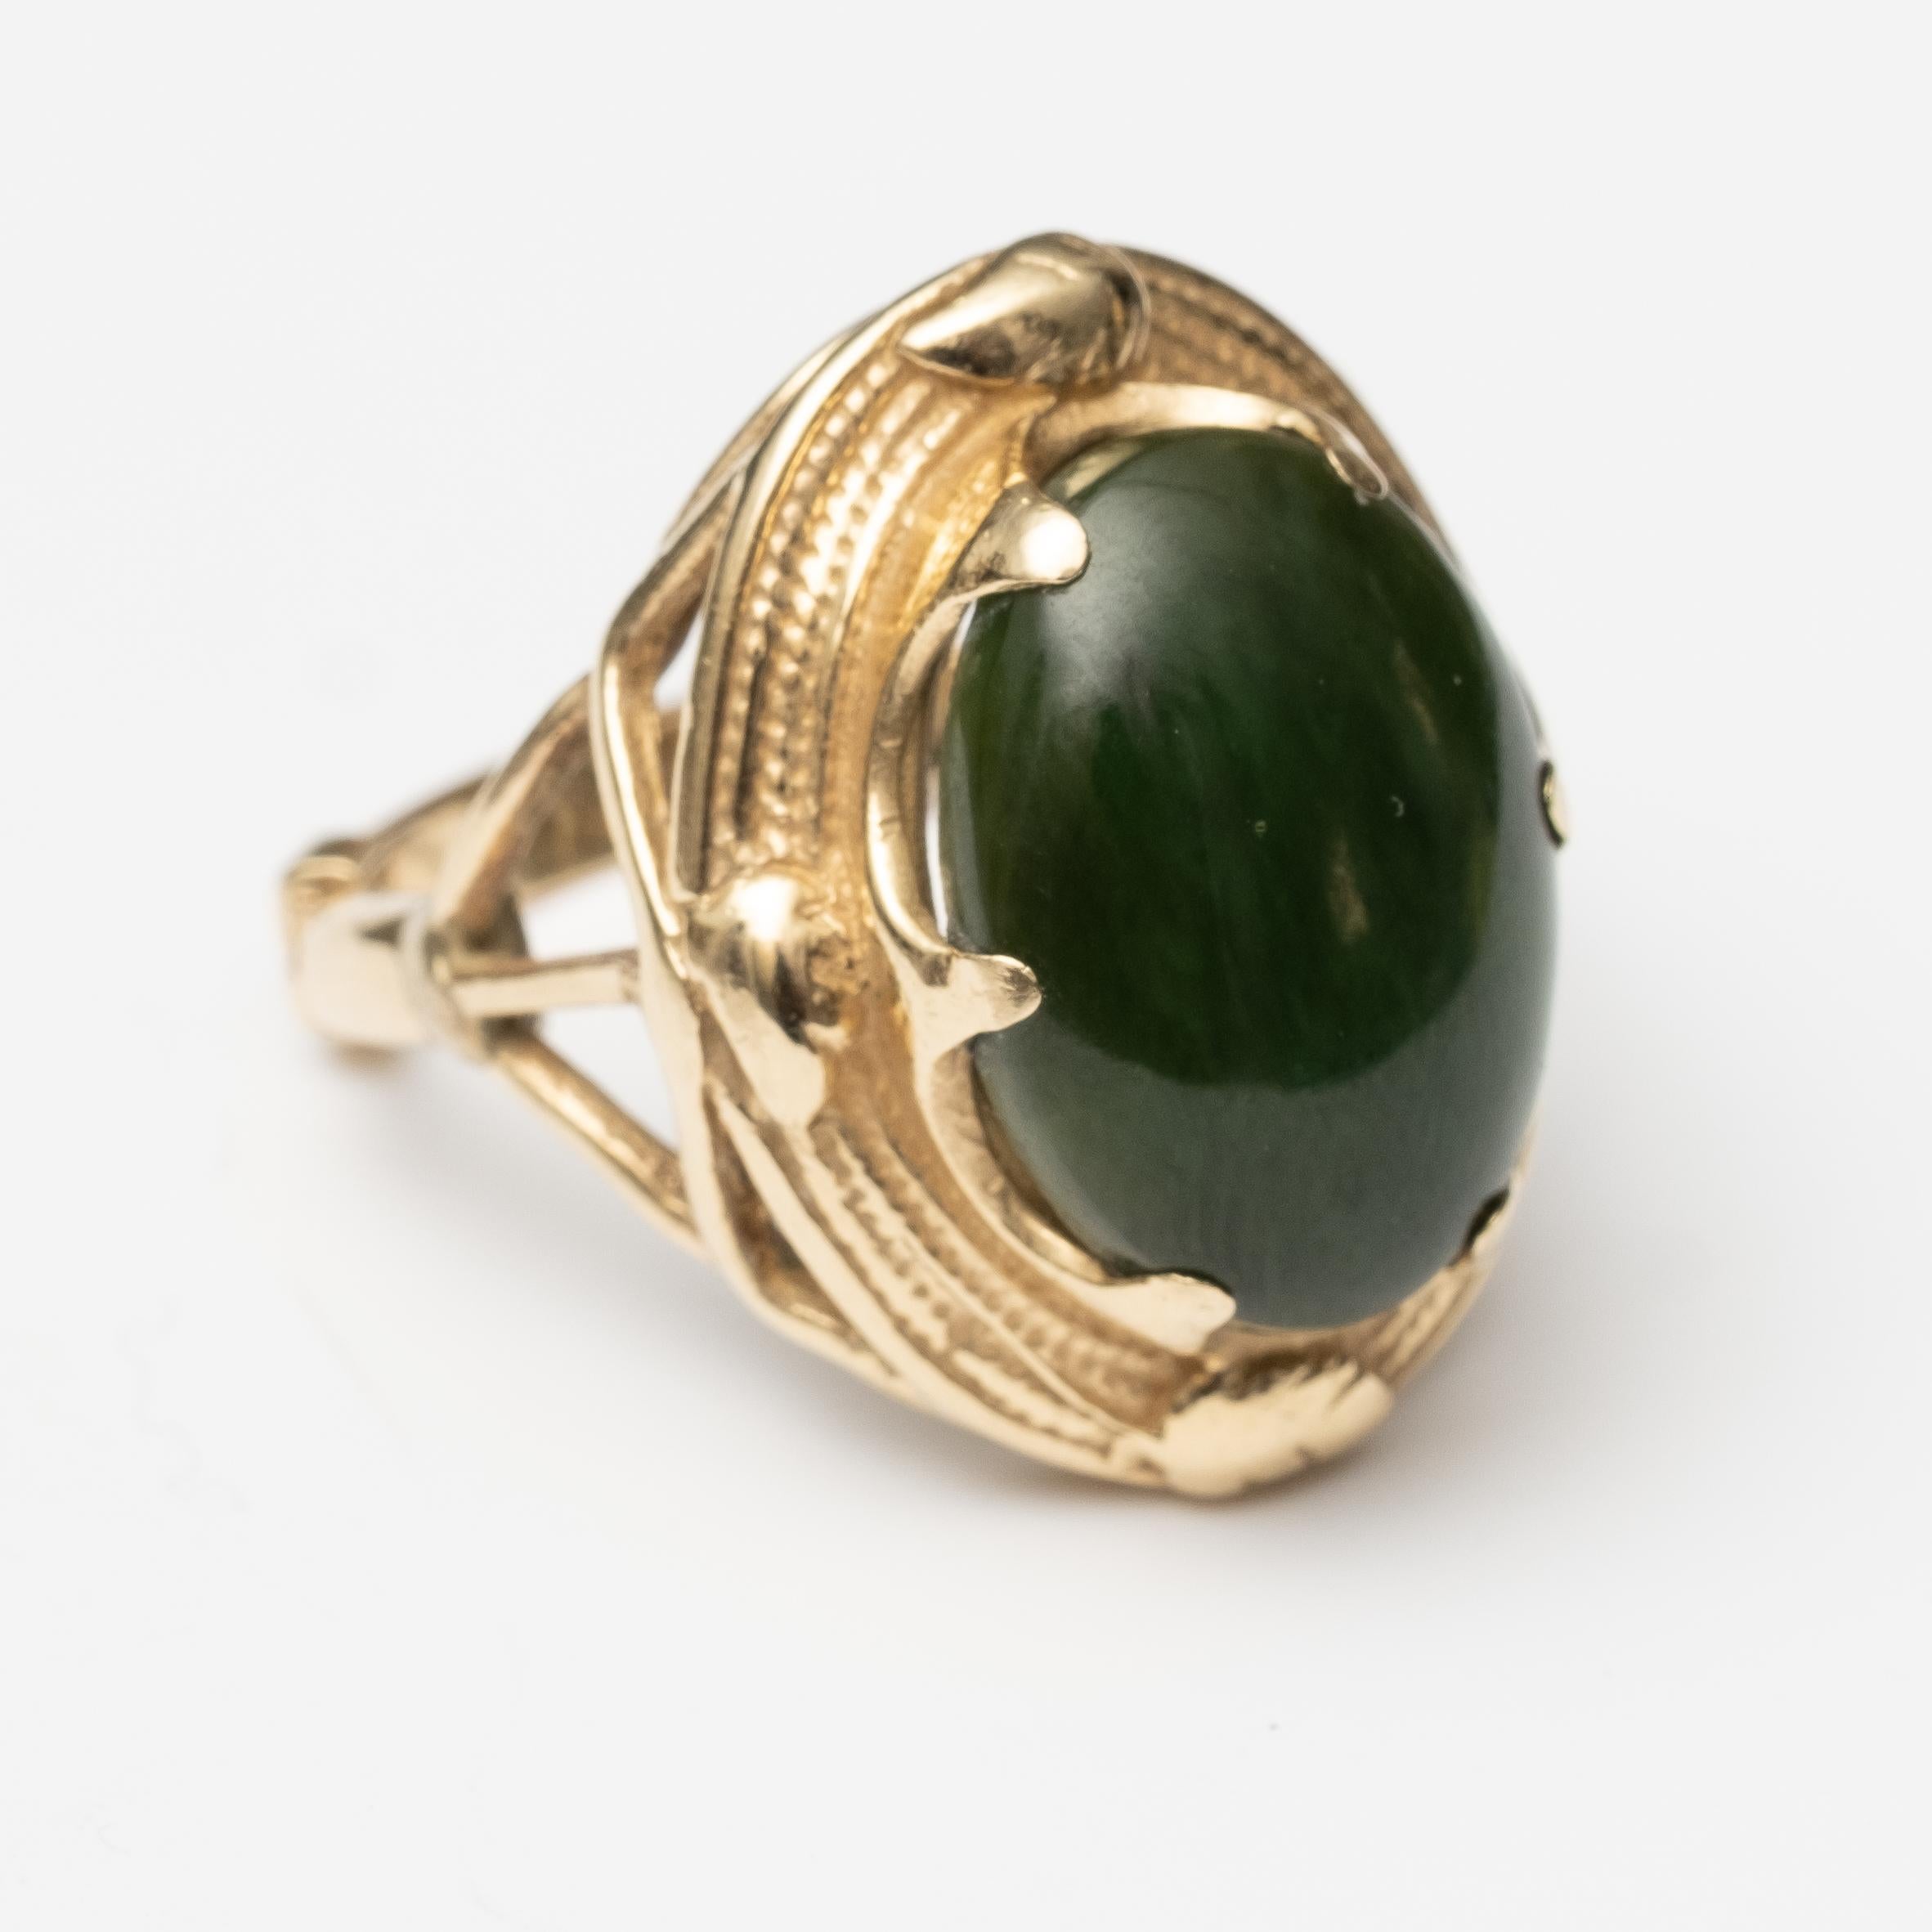 Vintage Men's 14K Nephrite Jade Ring. The ring has an adjustable band. Band fully closed is a size 9.5. The ring weighs 10.35grams. Stone measure 17.6mm long. In good condition overall